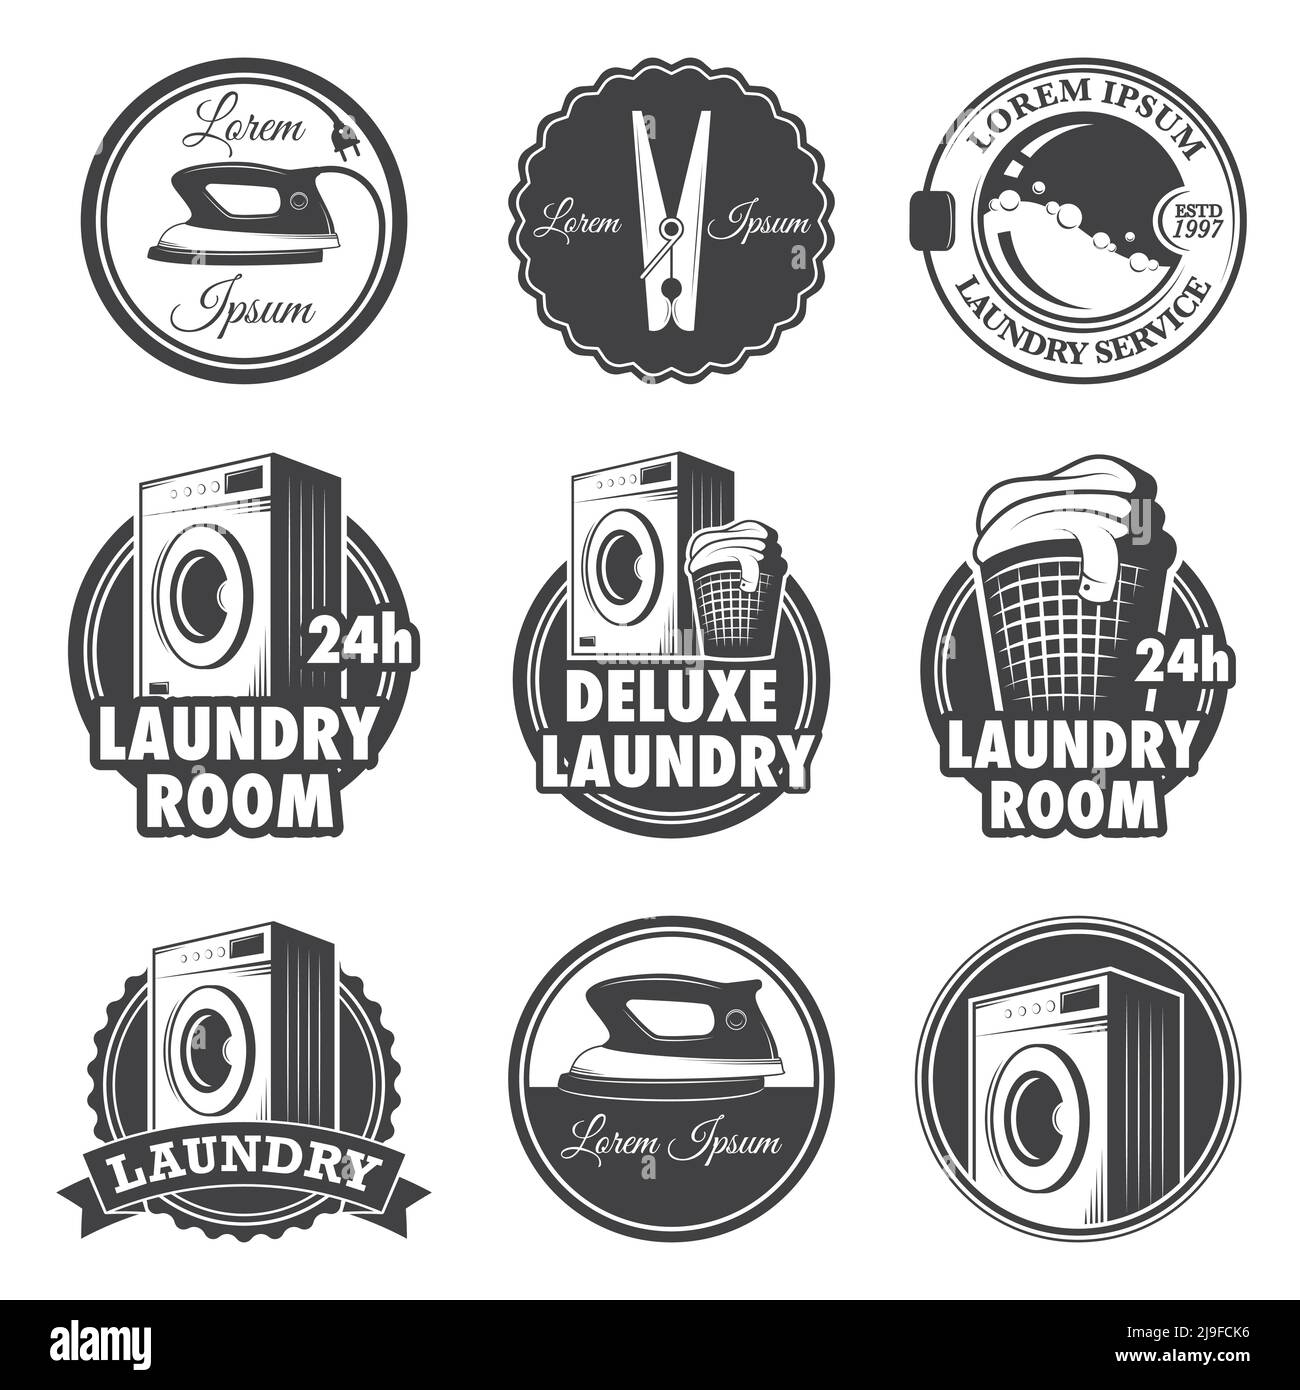 Vintage laundry illustration Stock Vector Images - Alamy